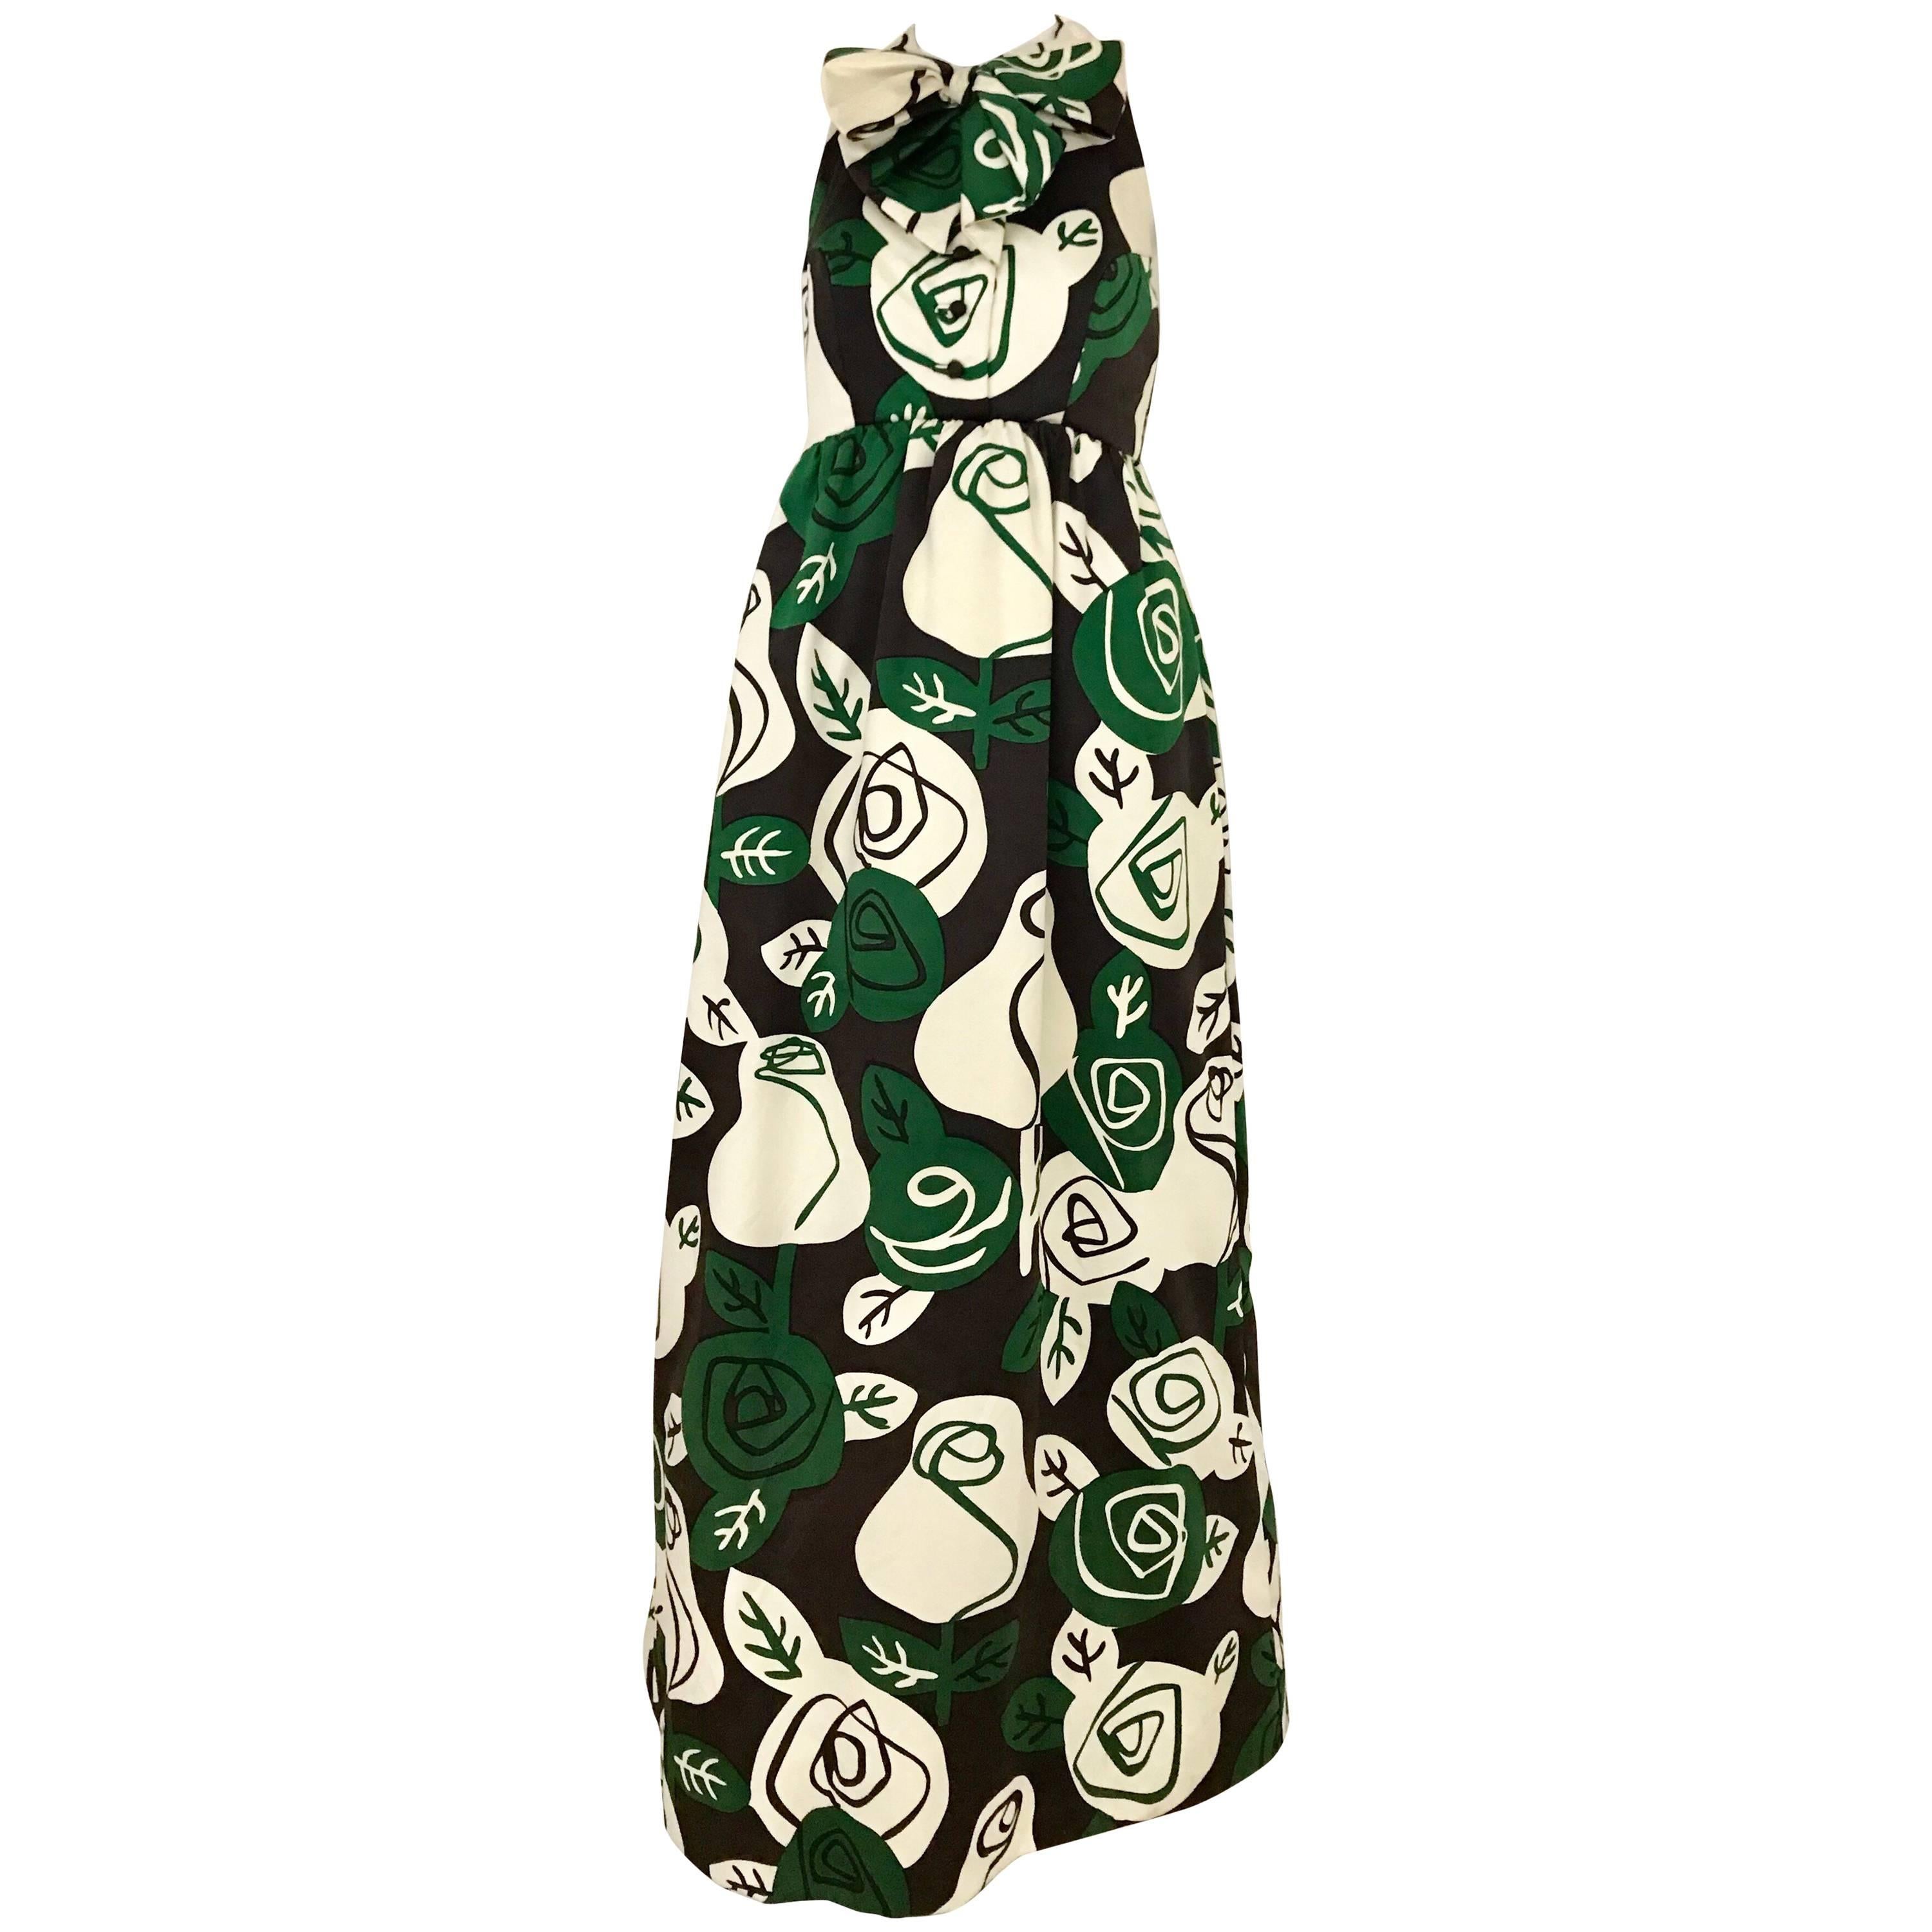 1960s Geoffrey Beene Green and White Floral Print Sleeveless Maxi Dress with Bow